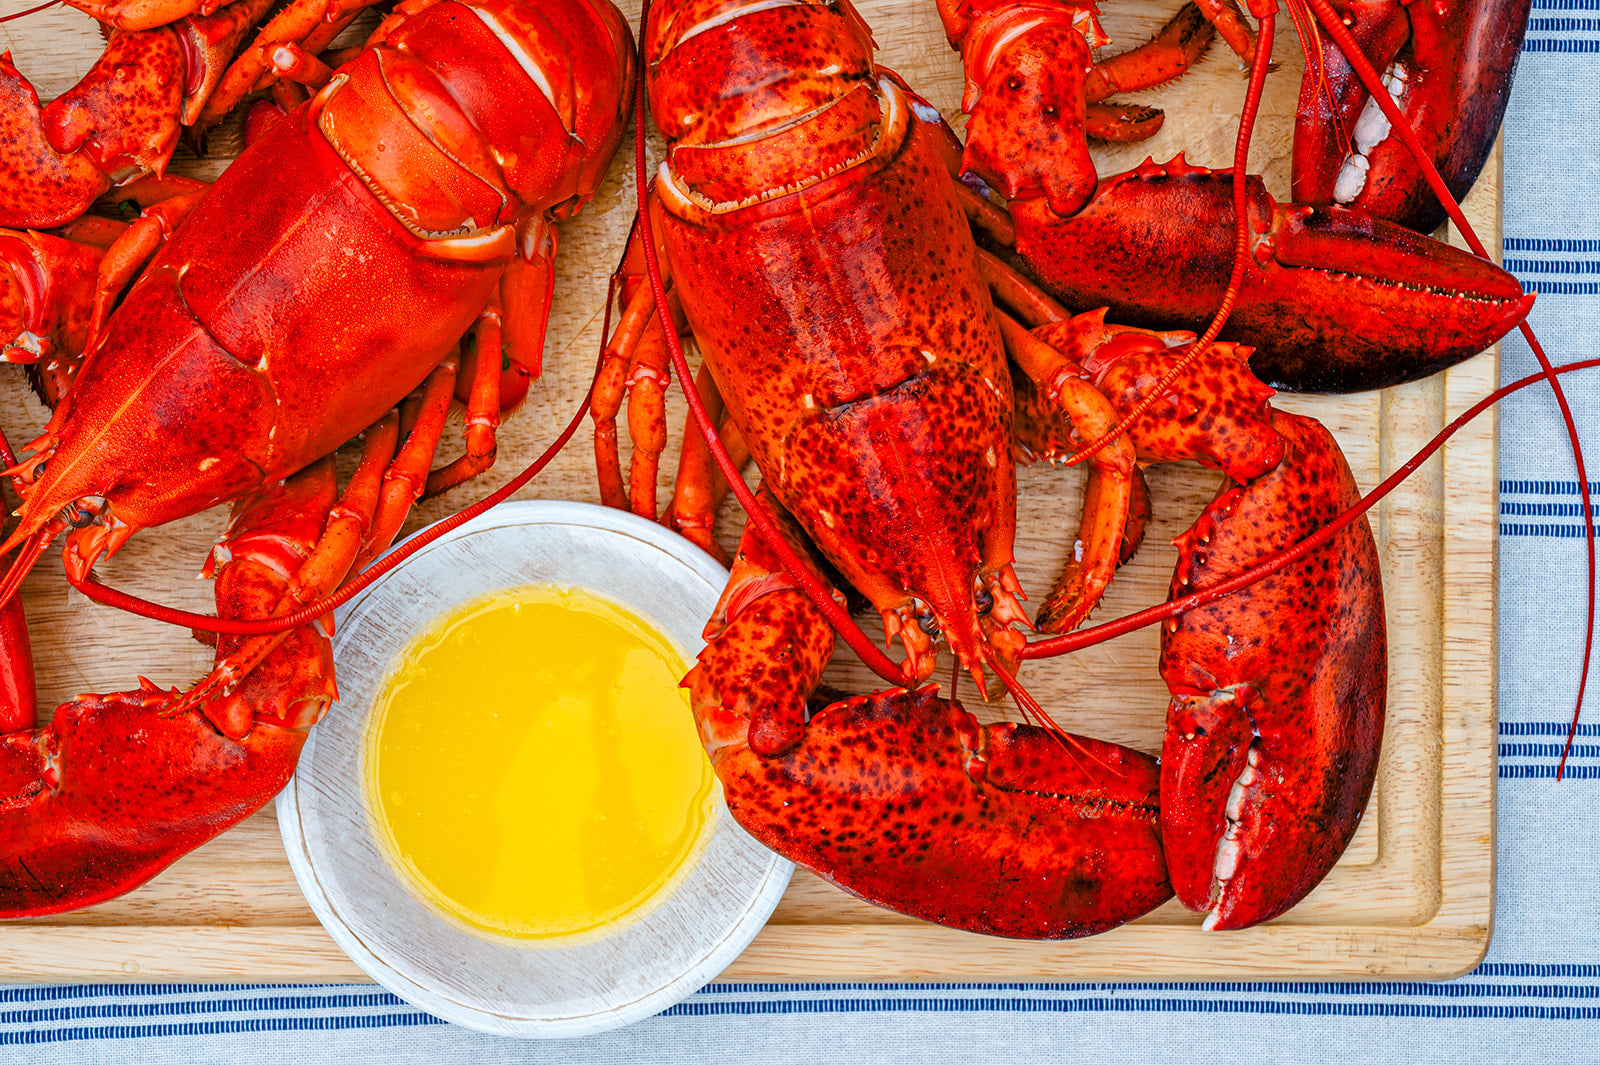 Live Gulf of Maine Lobsters – Legal Sea Foods Online